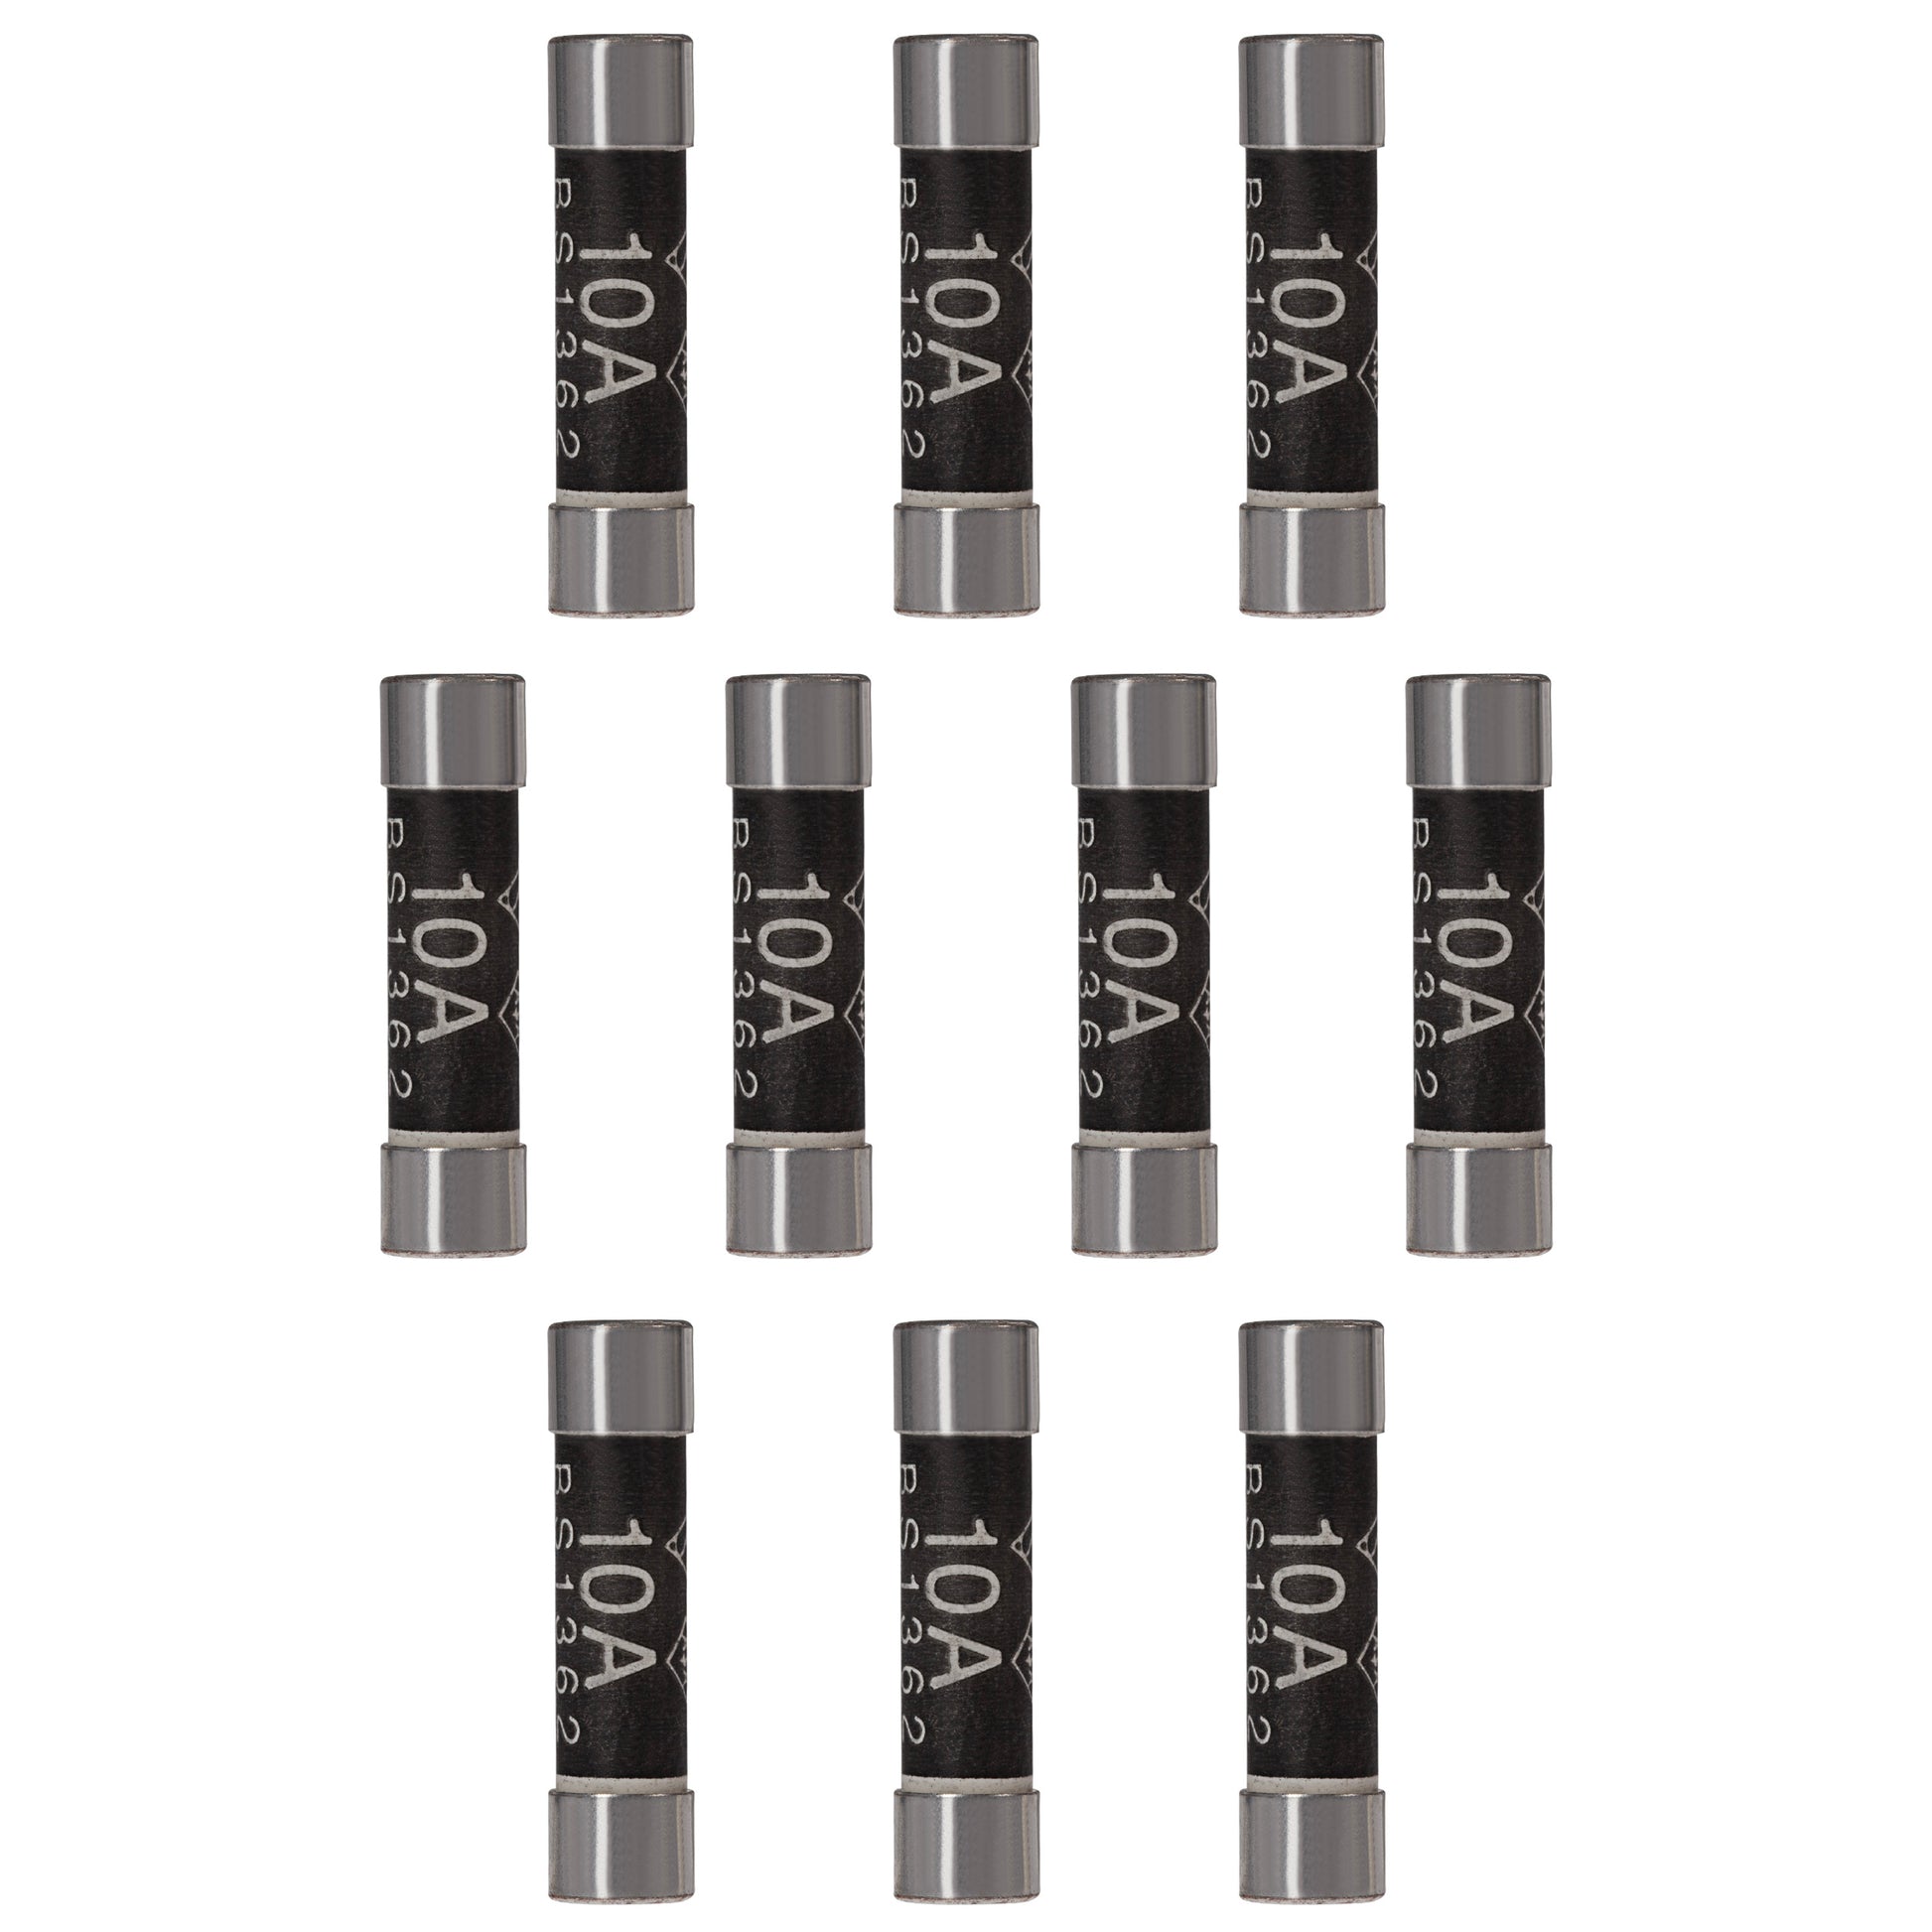 Maplin 10 AMP Domestic Fuse BS1362 6.3mm x 25.4mm - Pack of 10 - maplin.co.uk